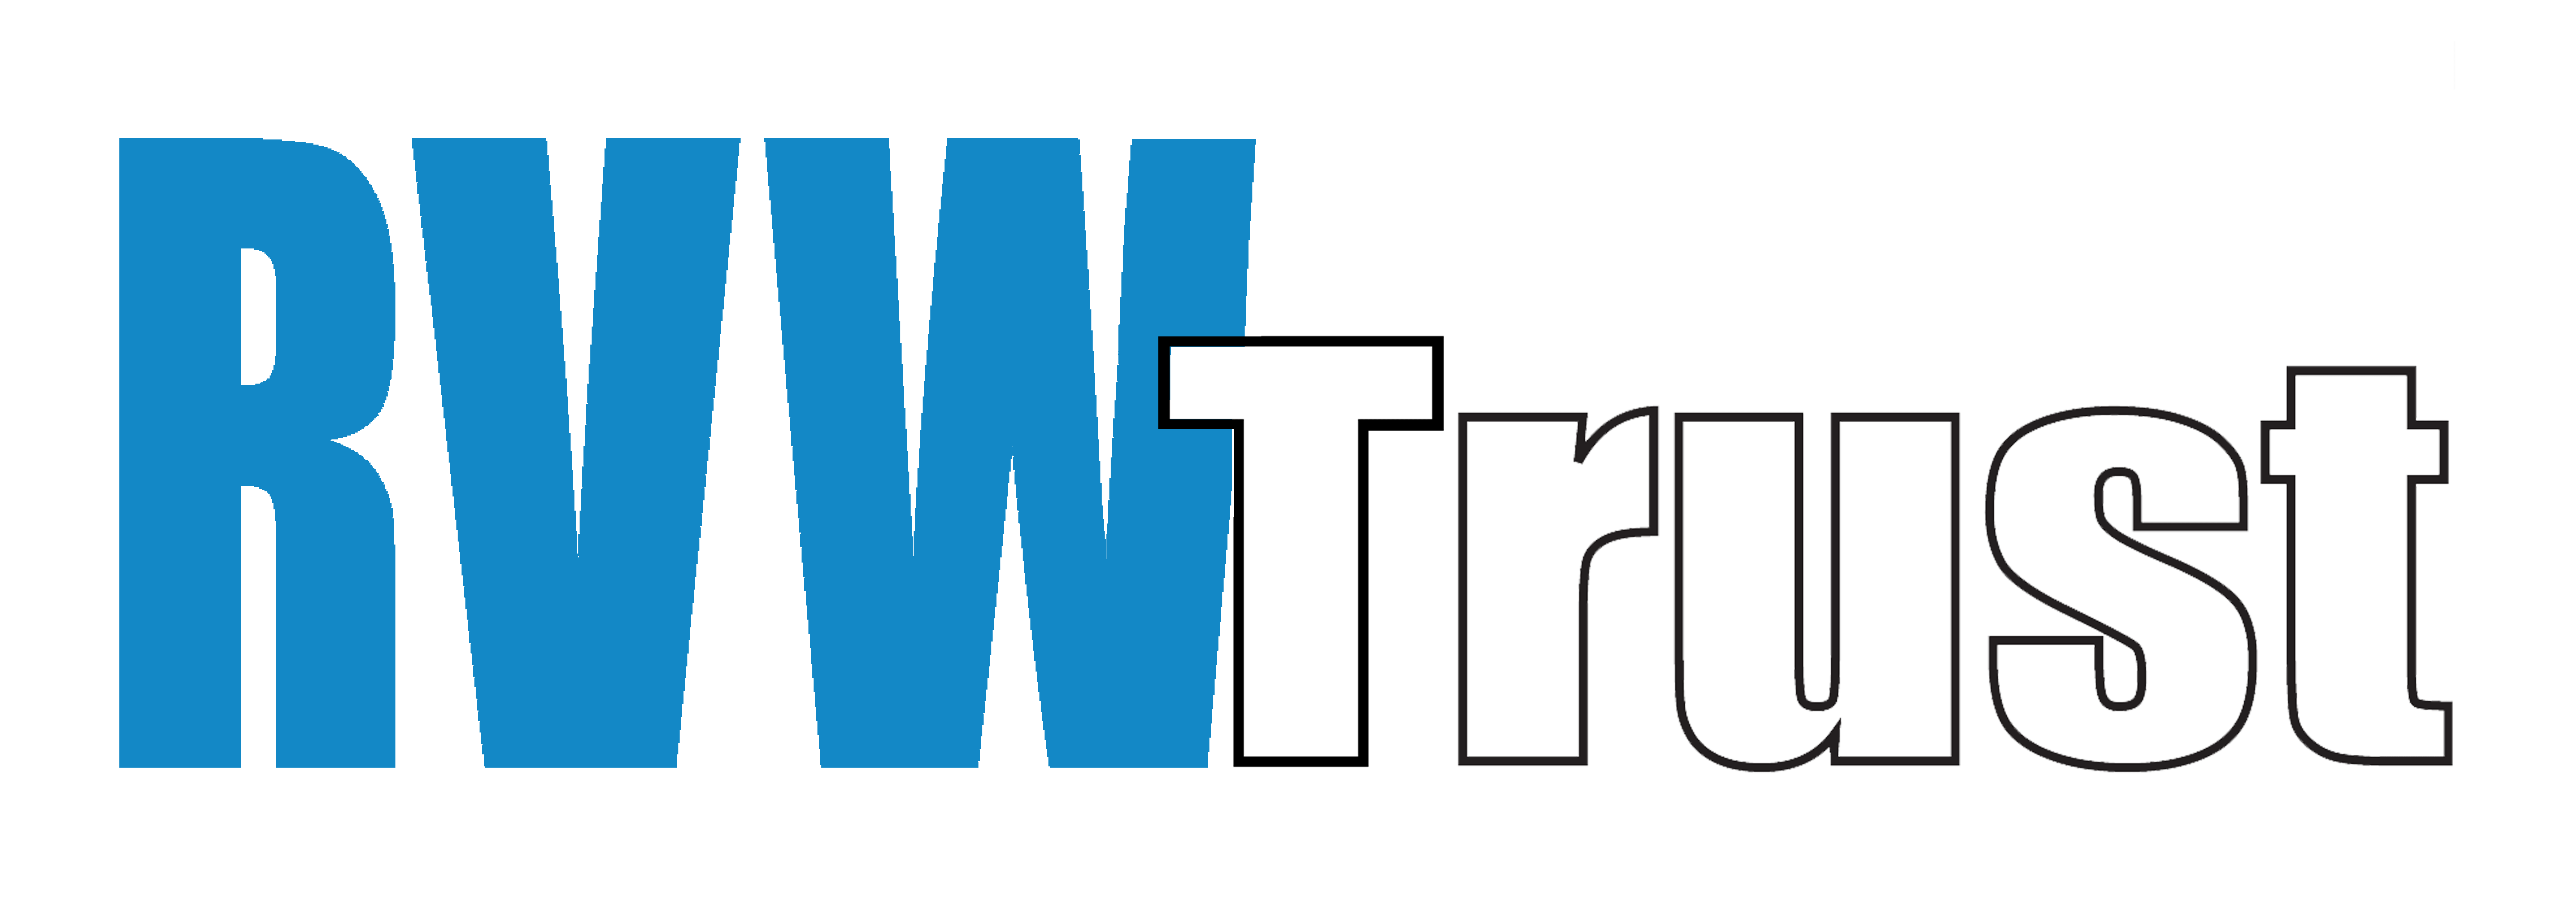 RVW in large blue capital letters overlapped slightly by the word Trust in upper and lower case in white letters with black border